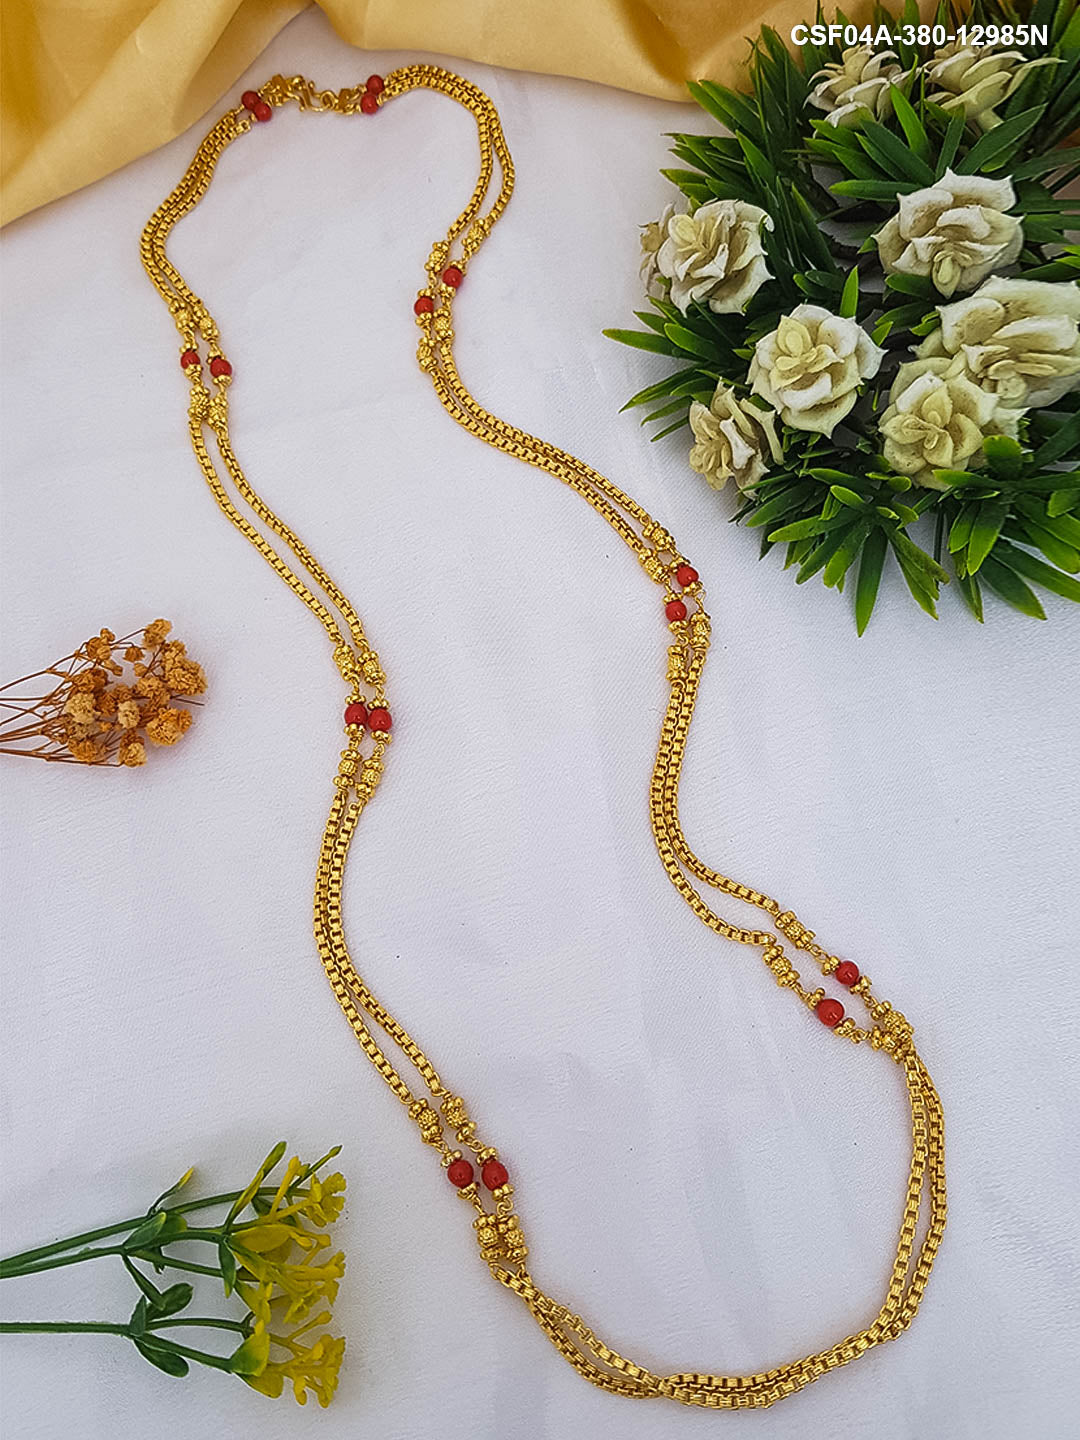 Micro Gold Plated Double Line Coral Chain 30 inches 12985N